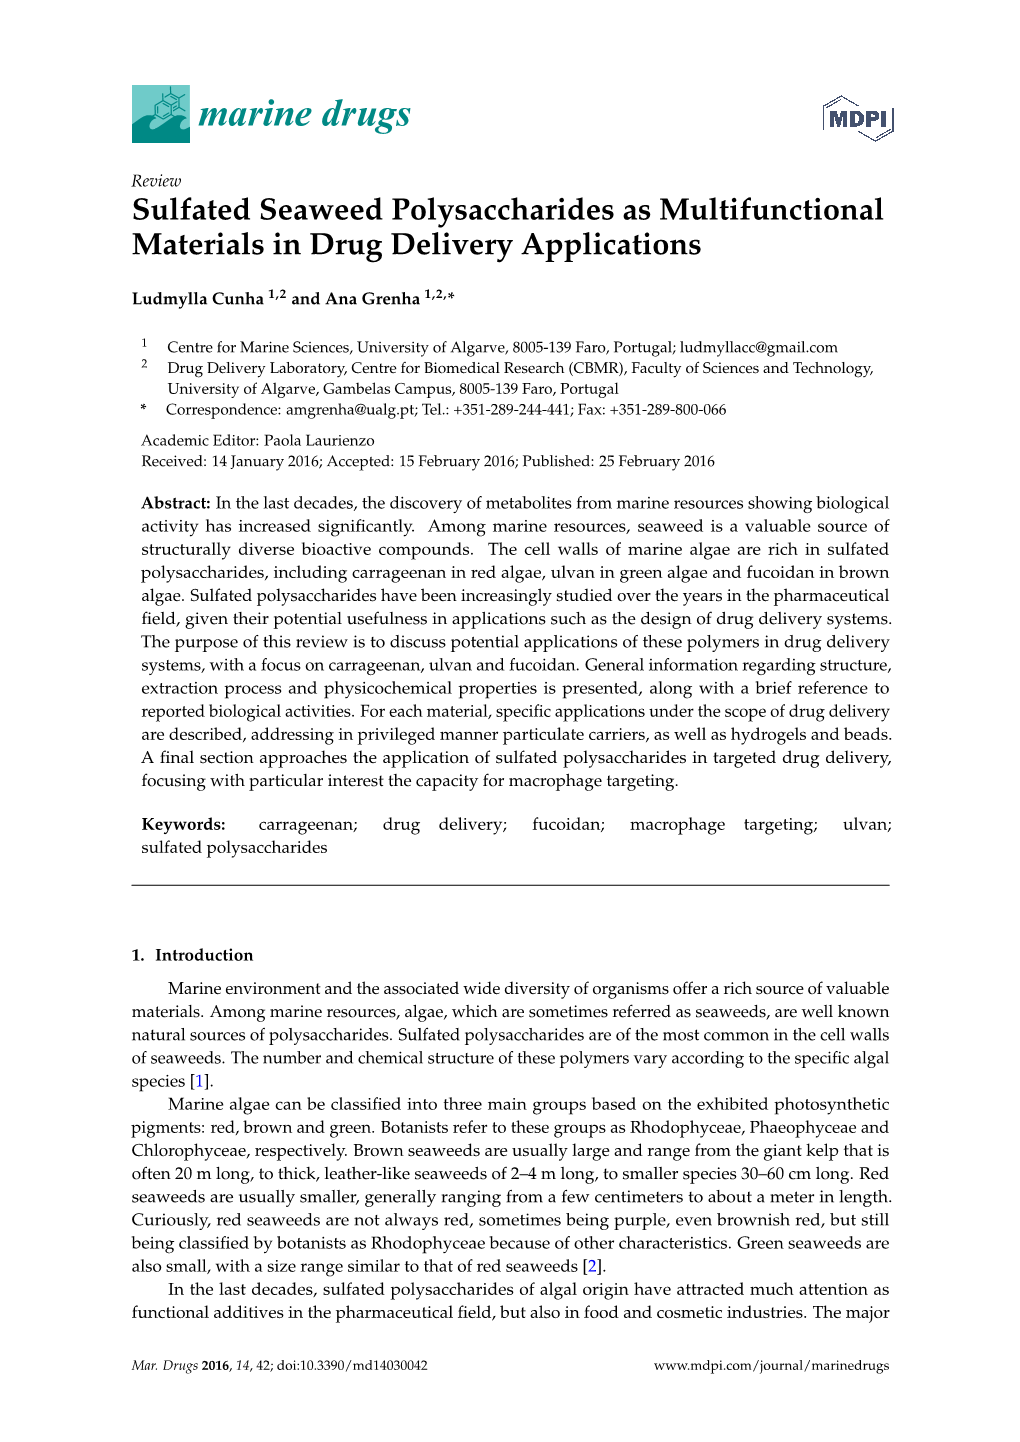 Sulfated Seaweed Polysaccharides As Multifunctional Materials in Drug Delivery Applications